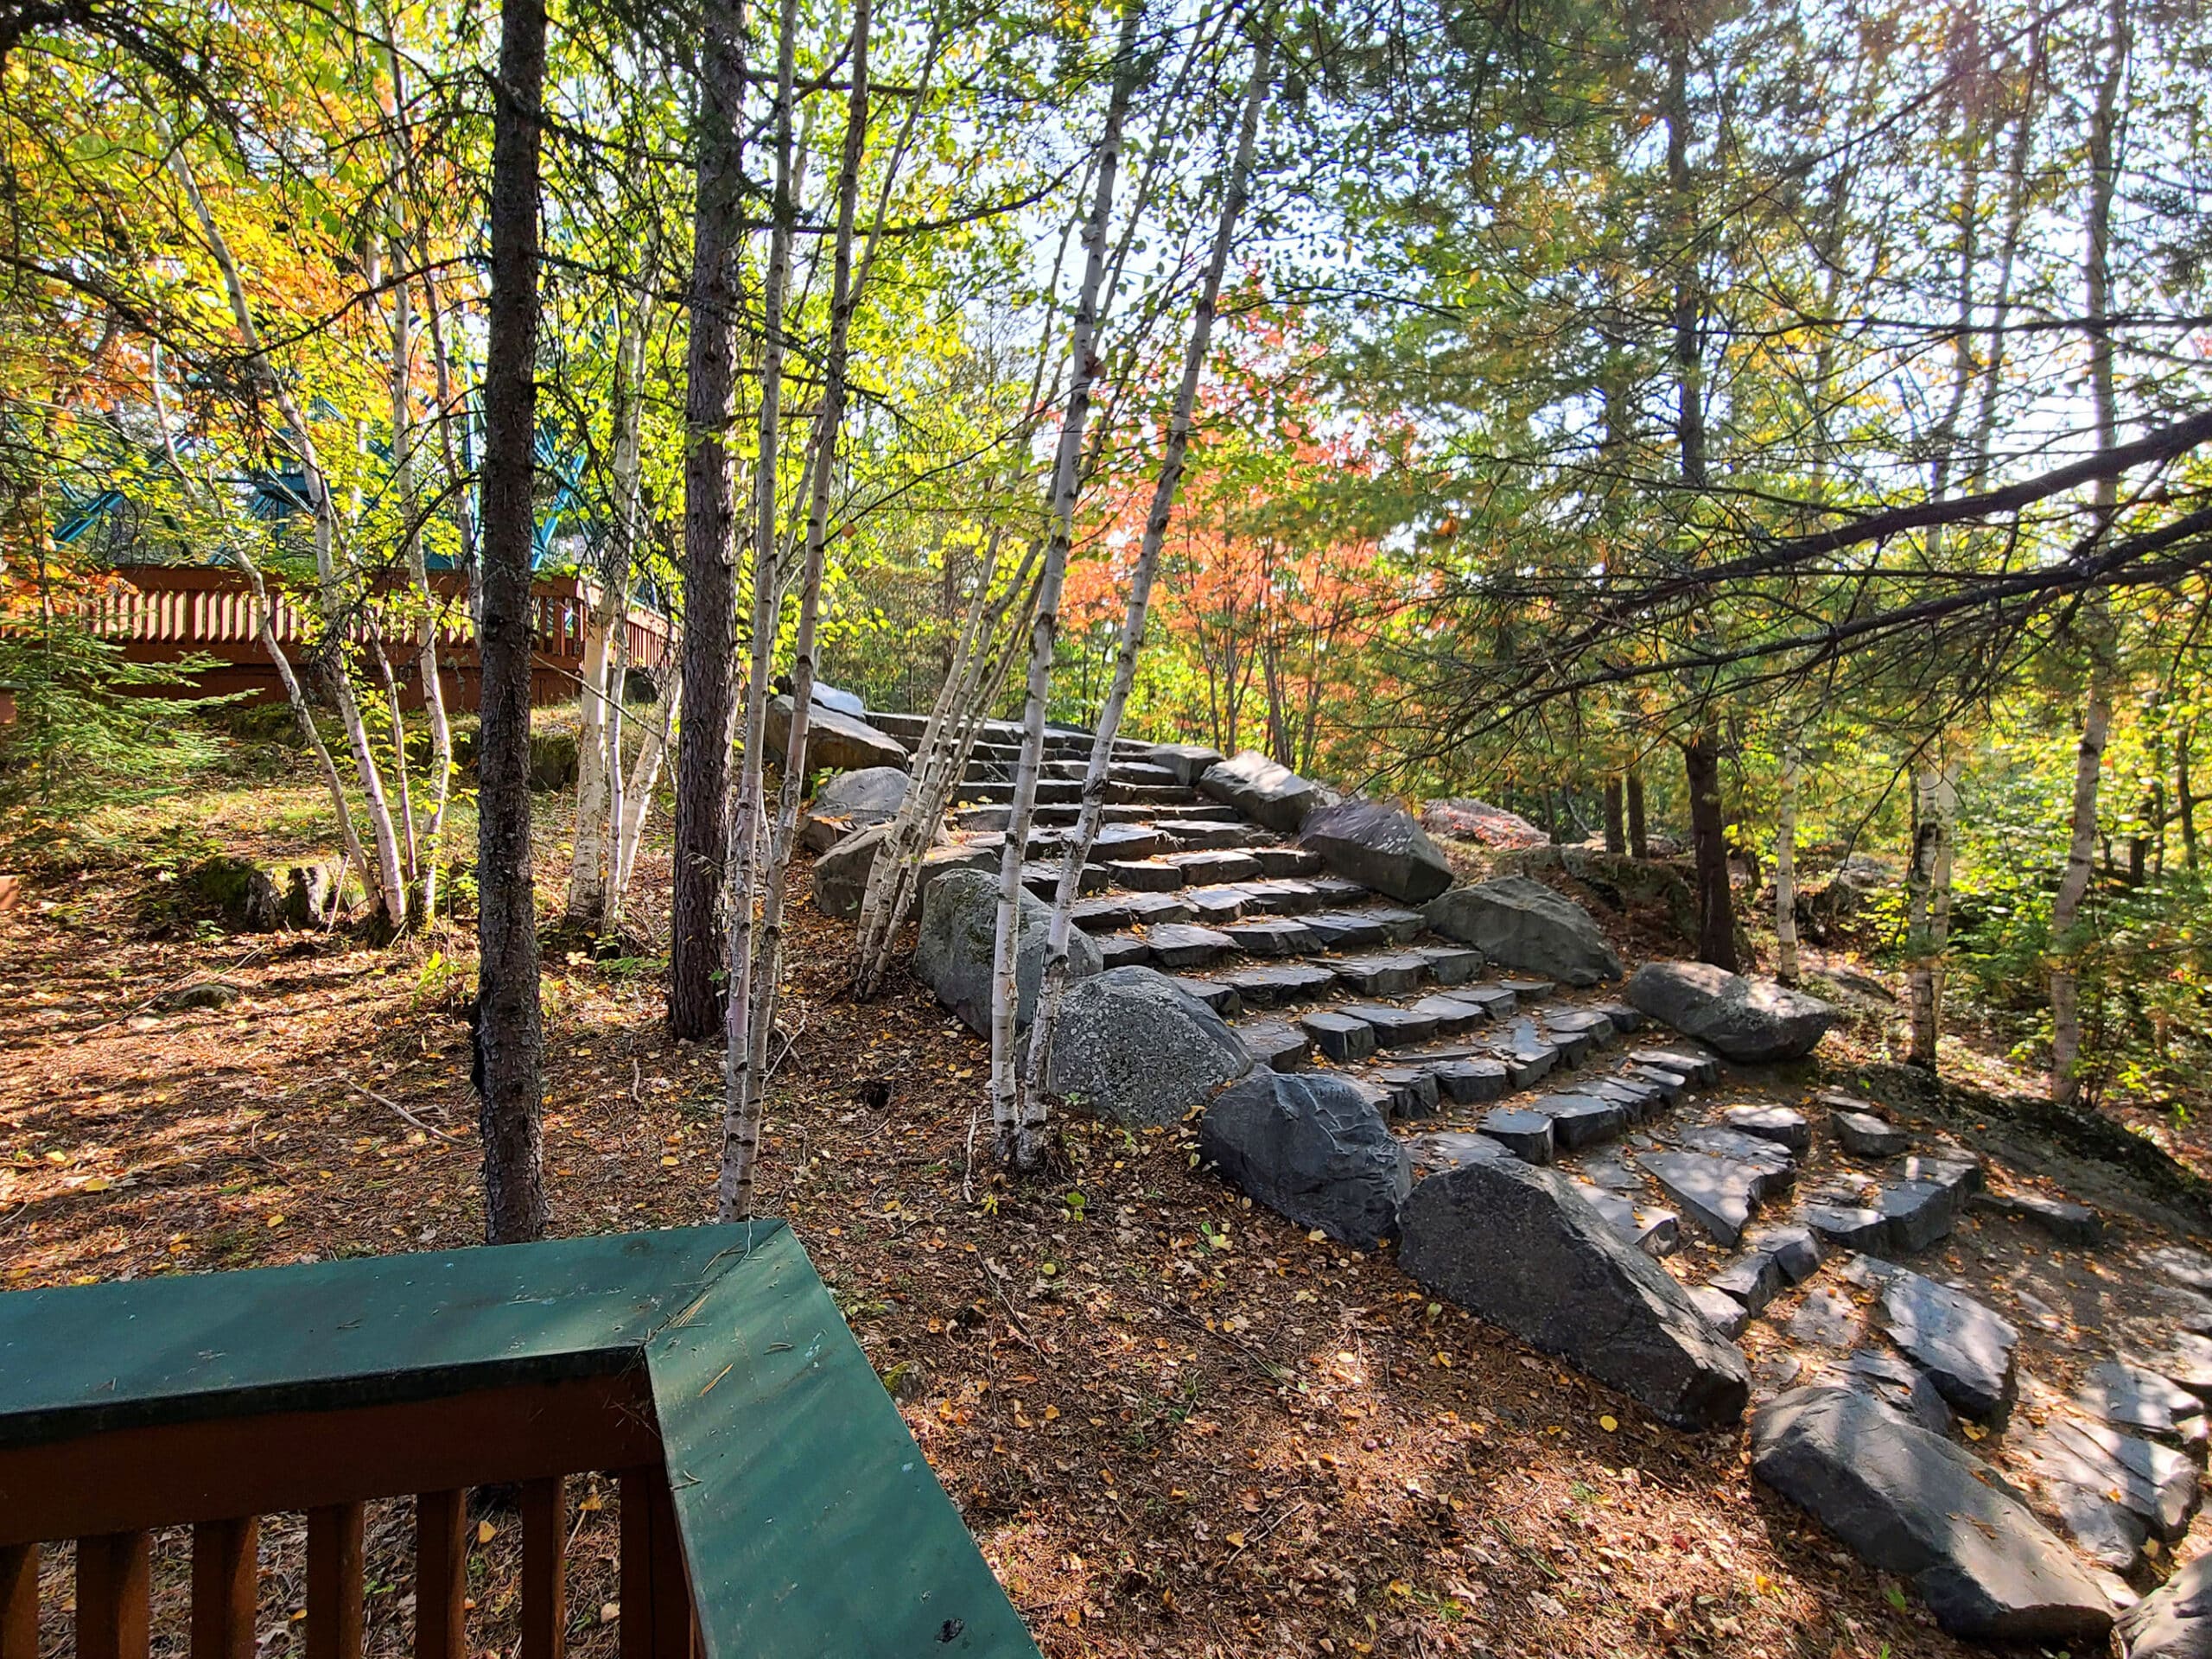 Some rustic rock stairs in the woods.